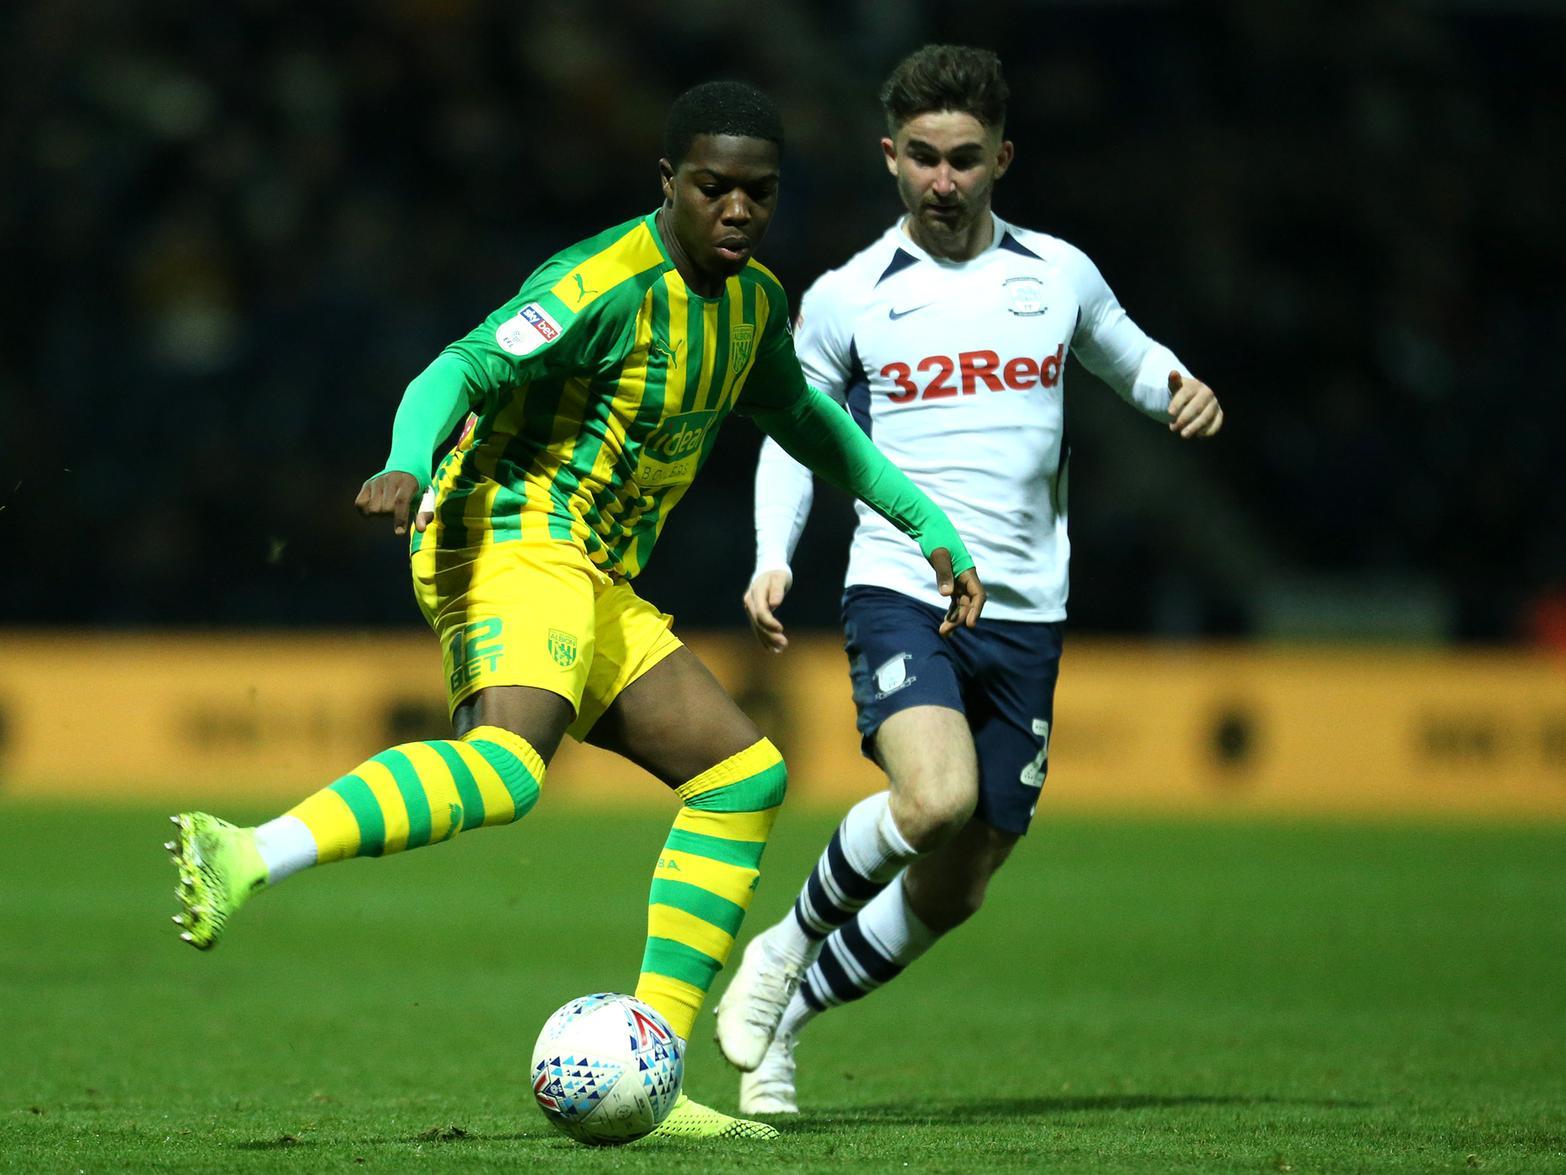 Relations between Nathan Ferguson and West Bromwich Albion have reportedly broken down after his failed move to Crystal Palace. (The Athletic)